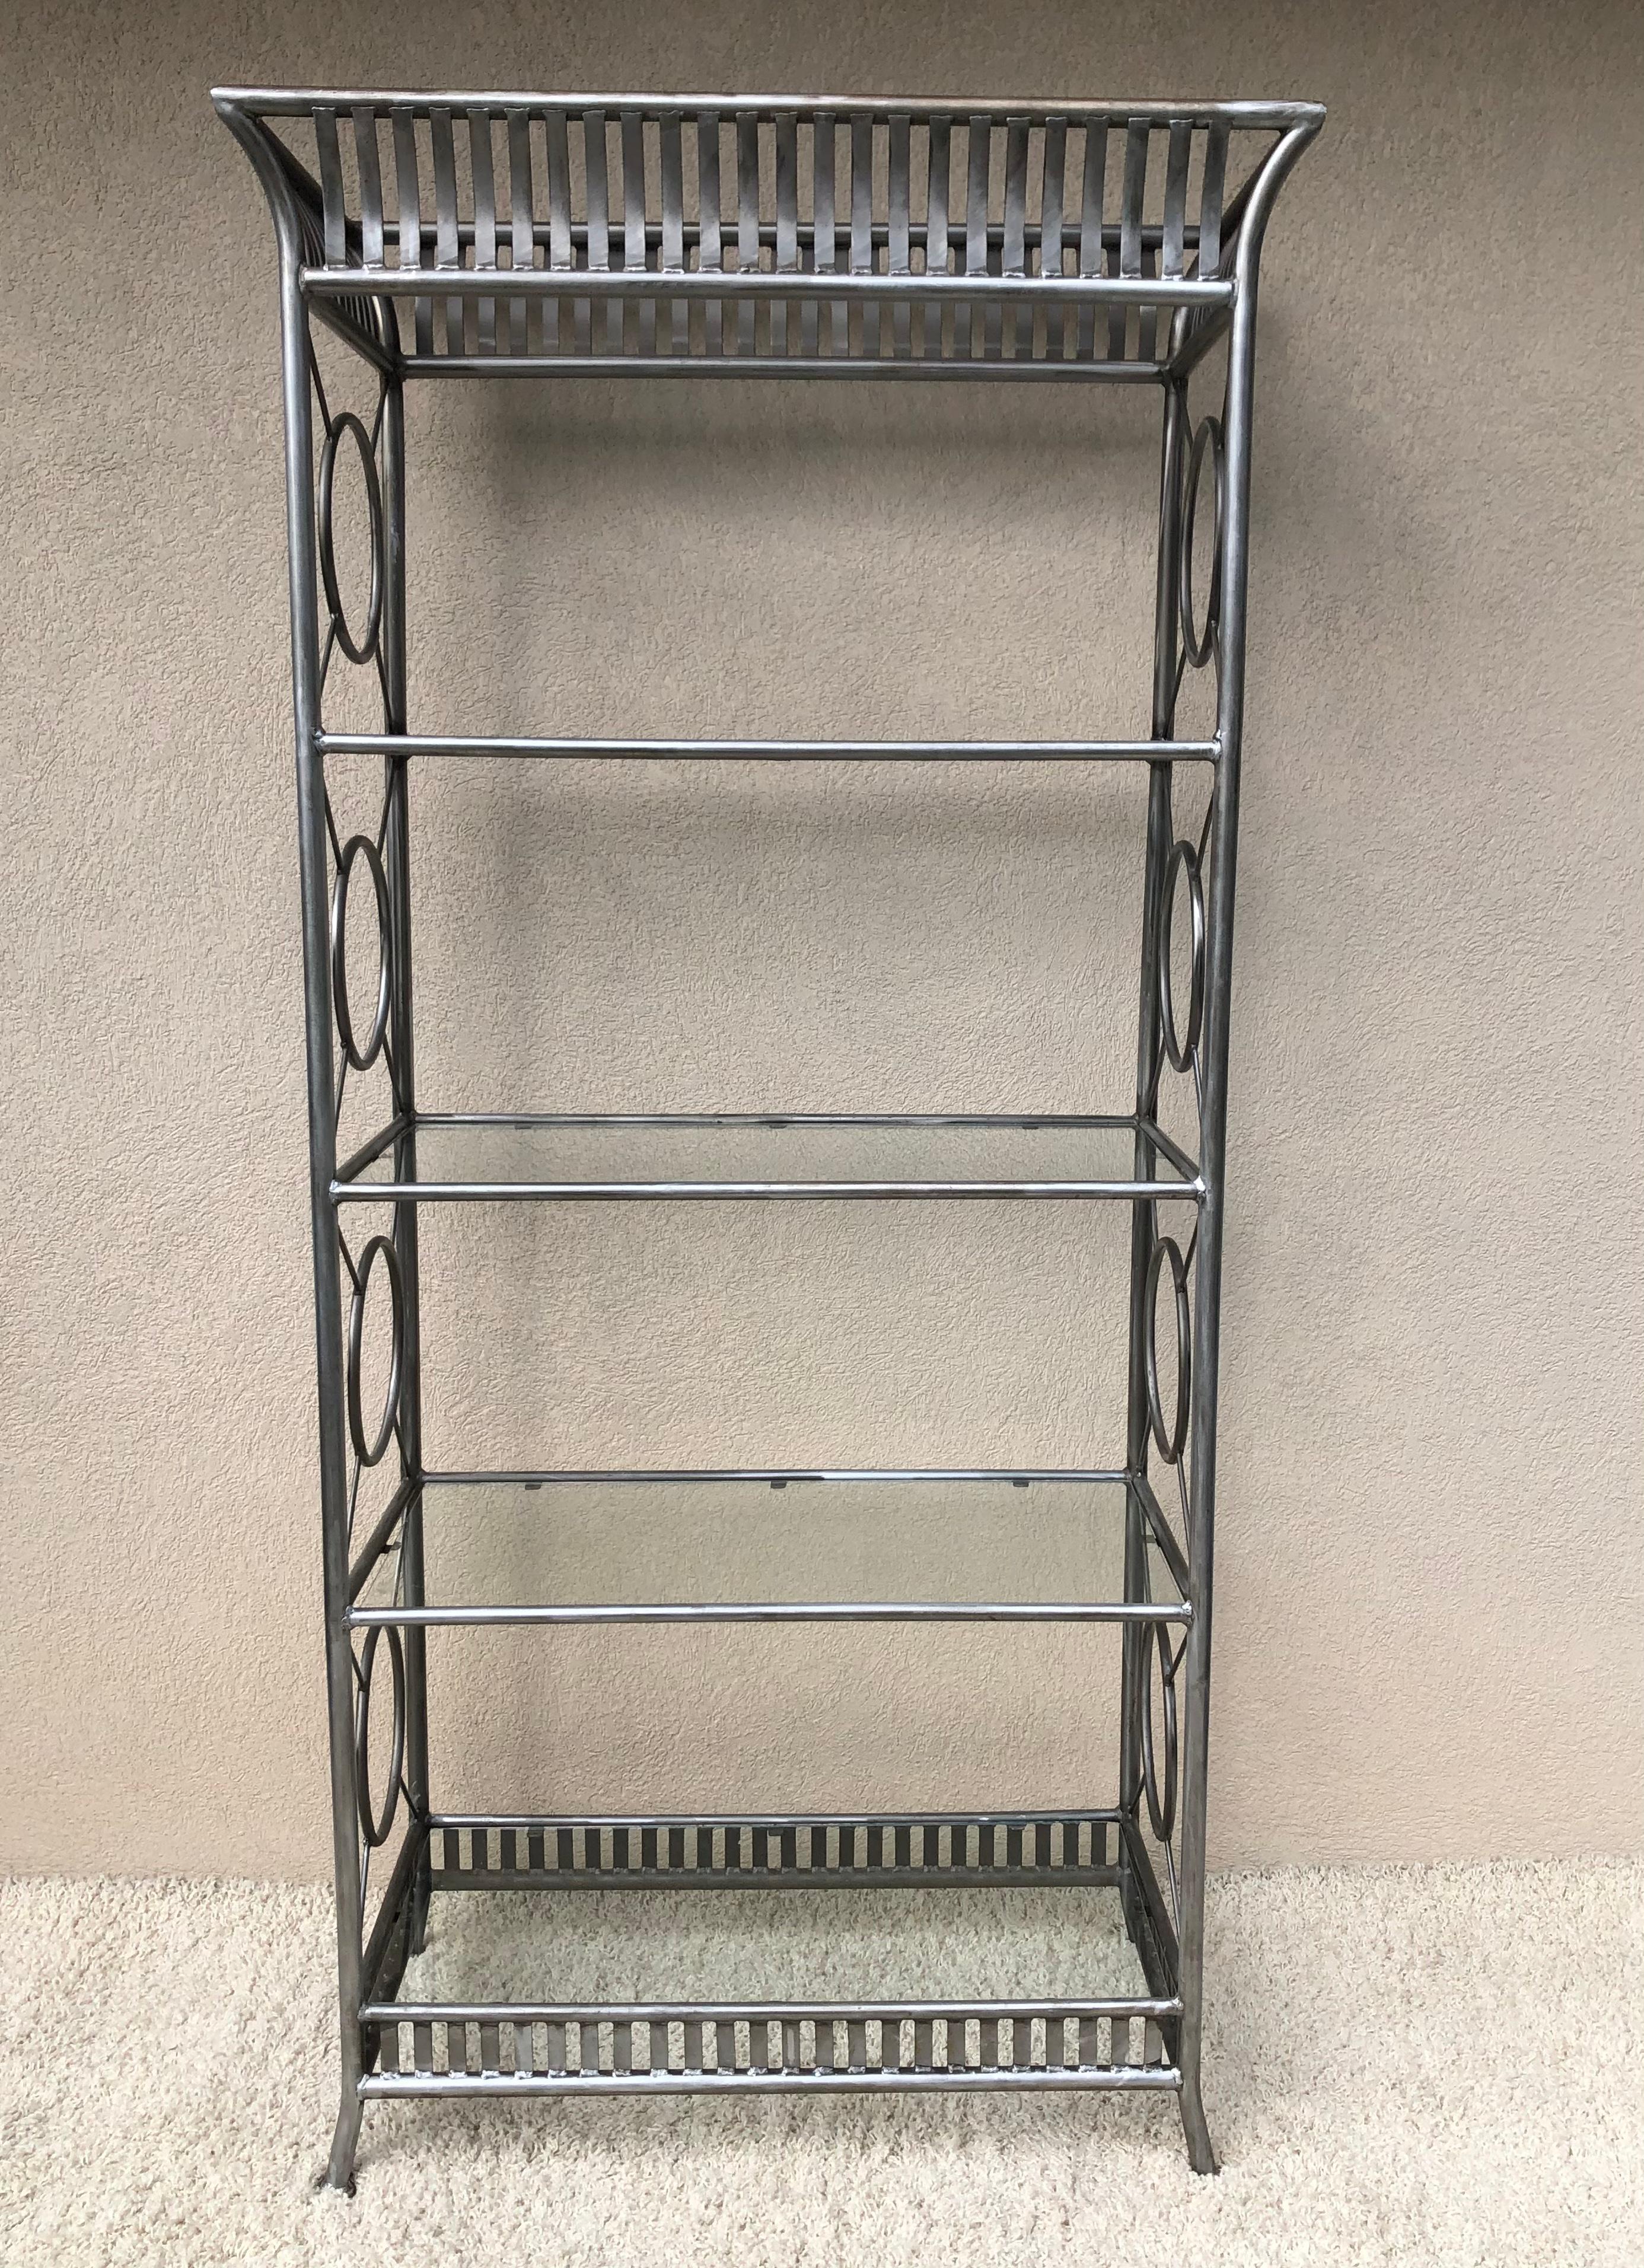 Tall Maison Jansen style Hollywood Regency, steel and glass etagere, elaborate hand made, with decorative top and base .unique size and scale. 5 glass shelves in all, vintage patina and condition. Silver tone to metal.